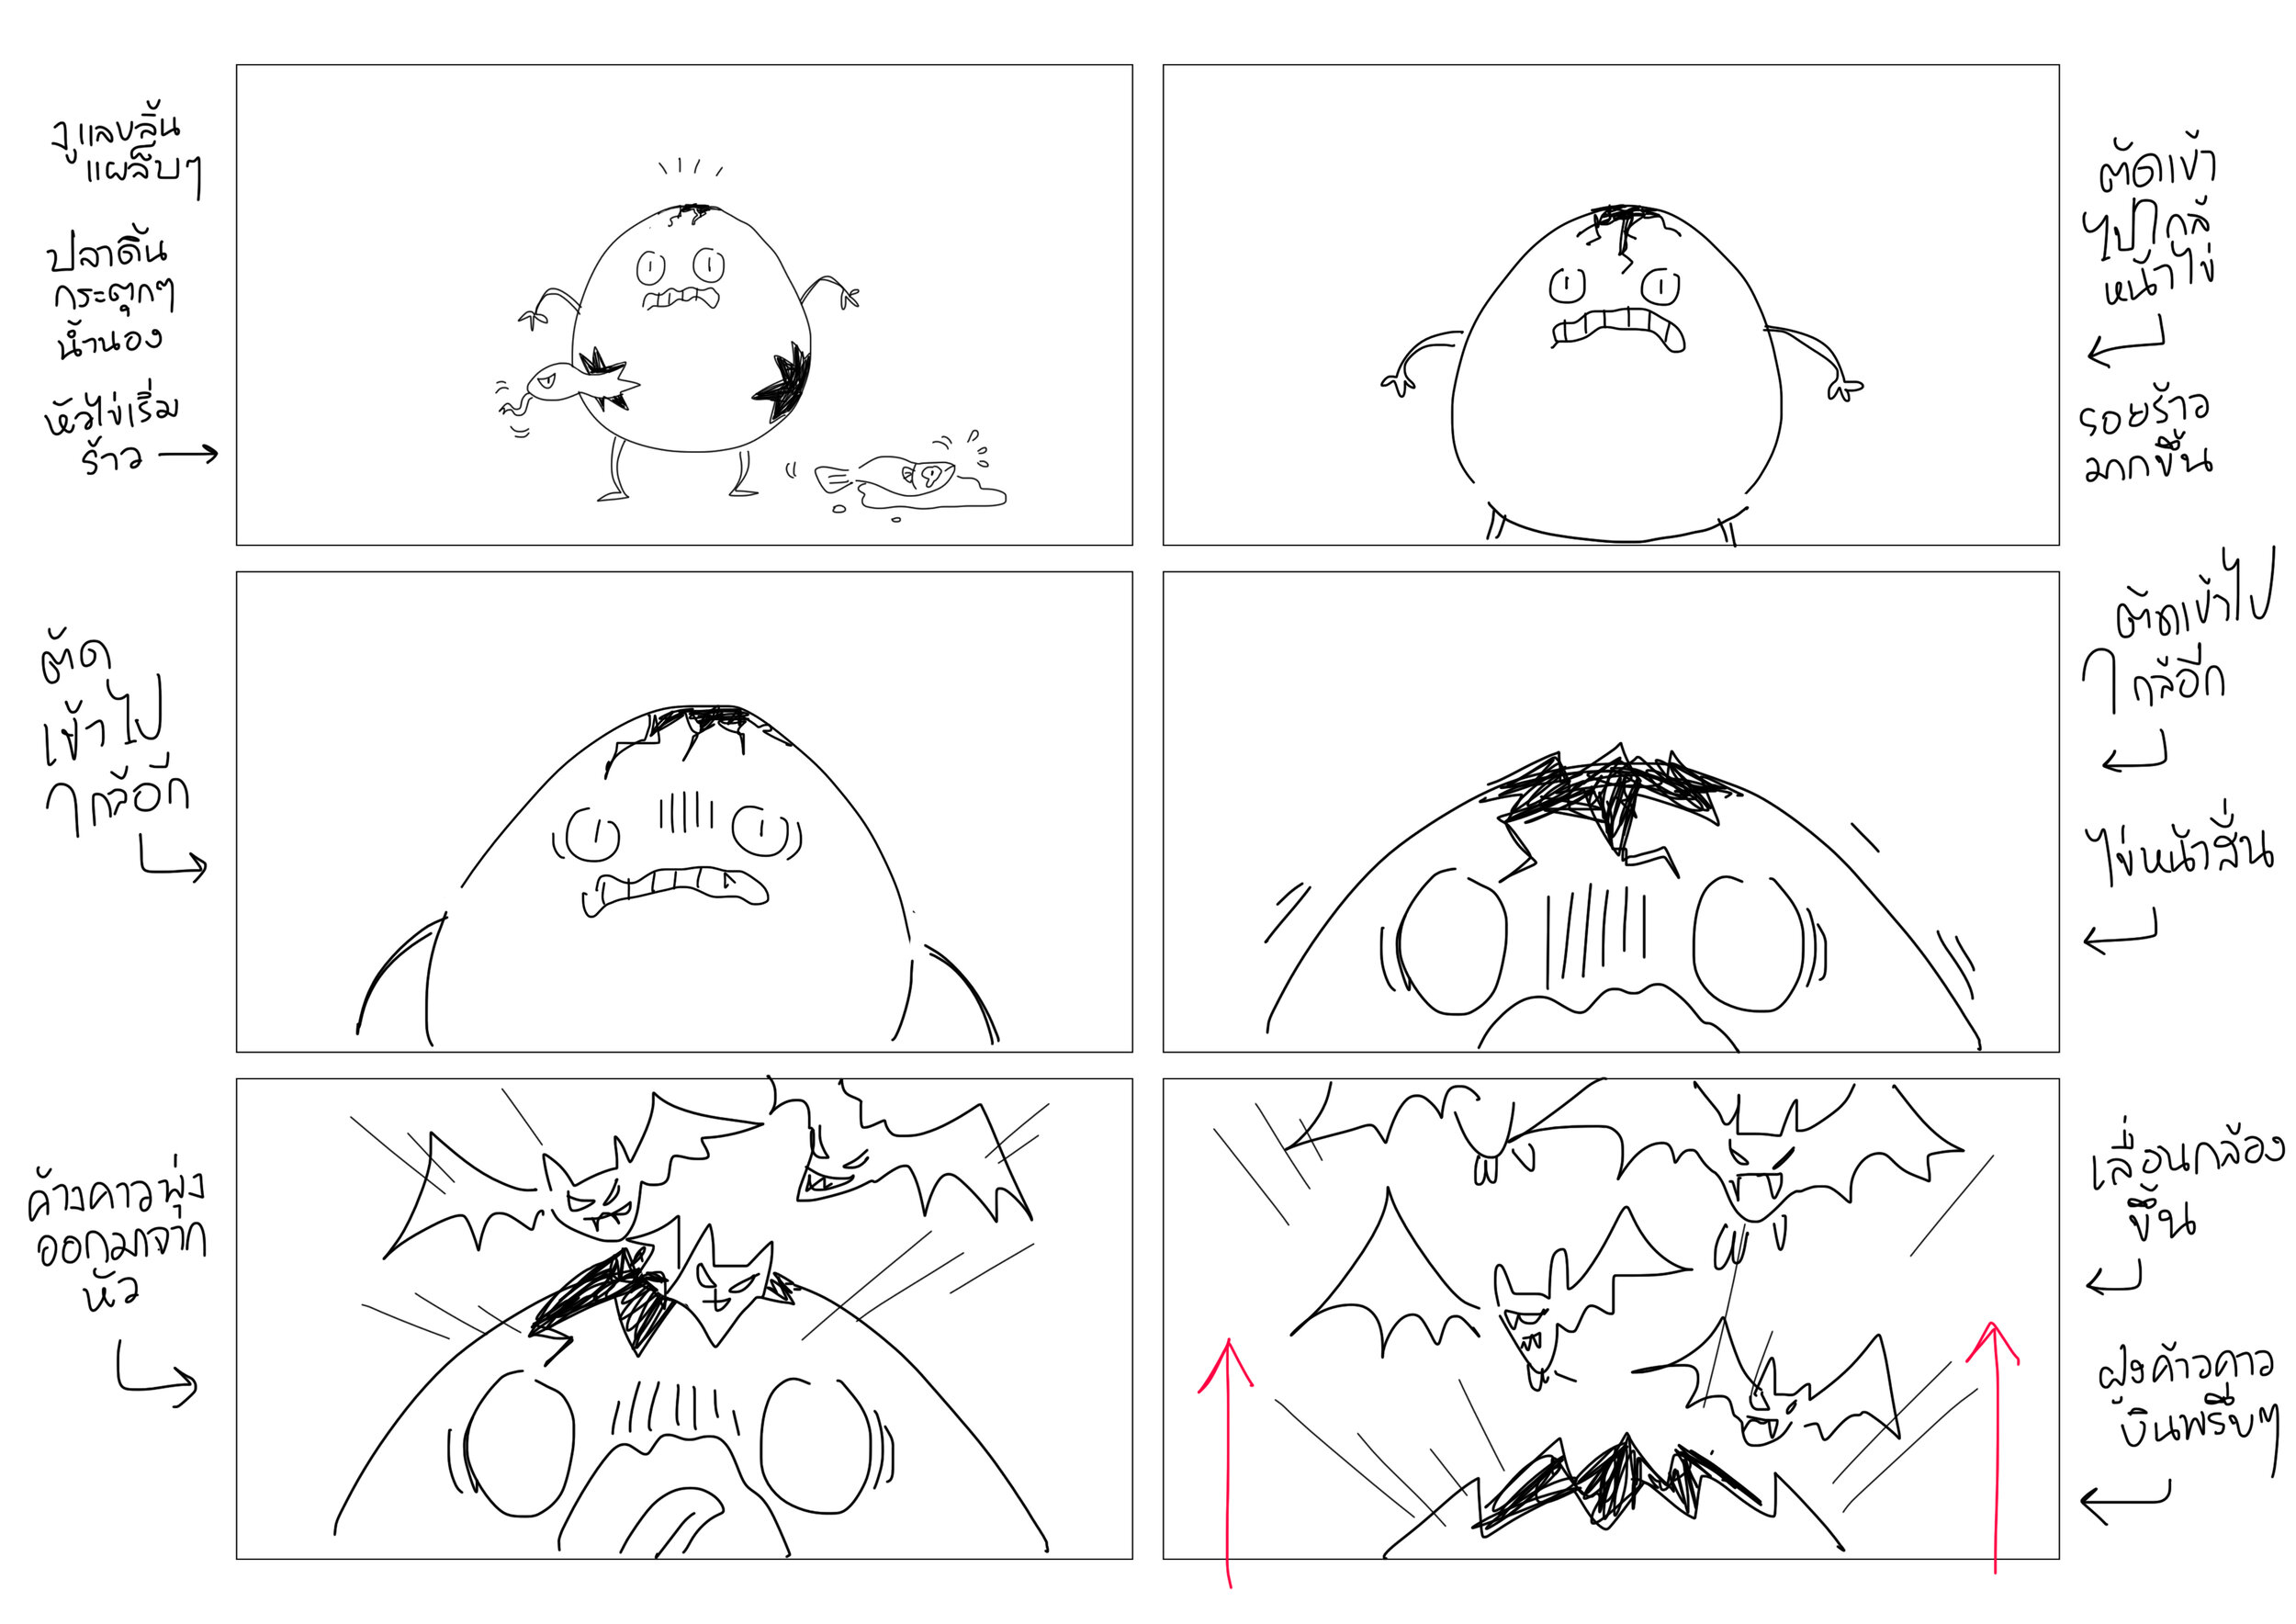 Storyboard for animation